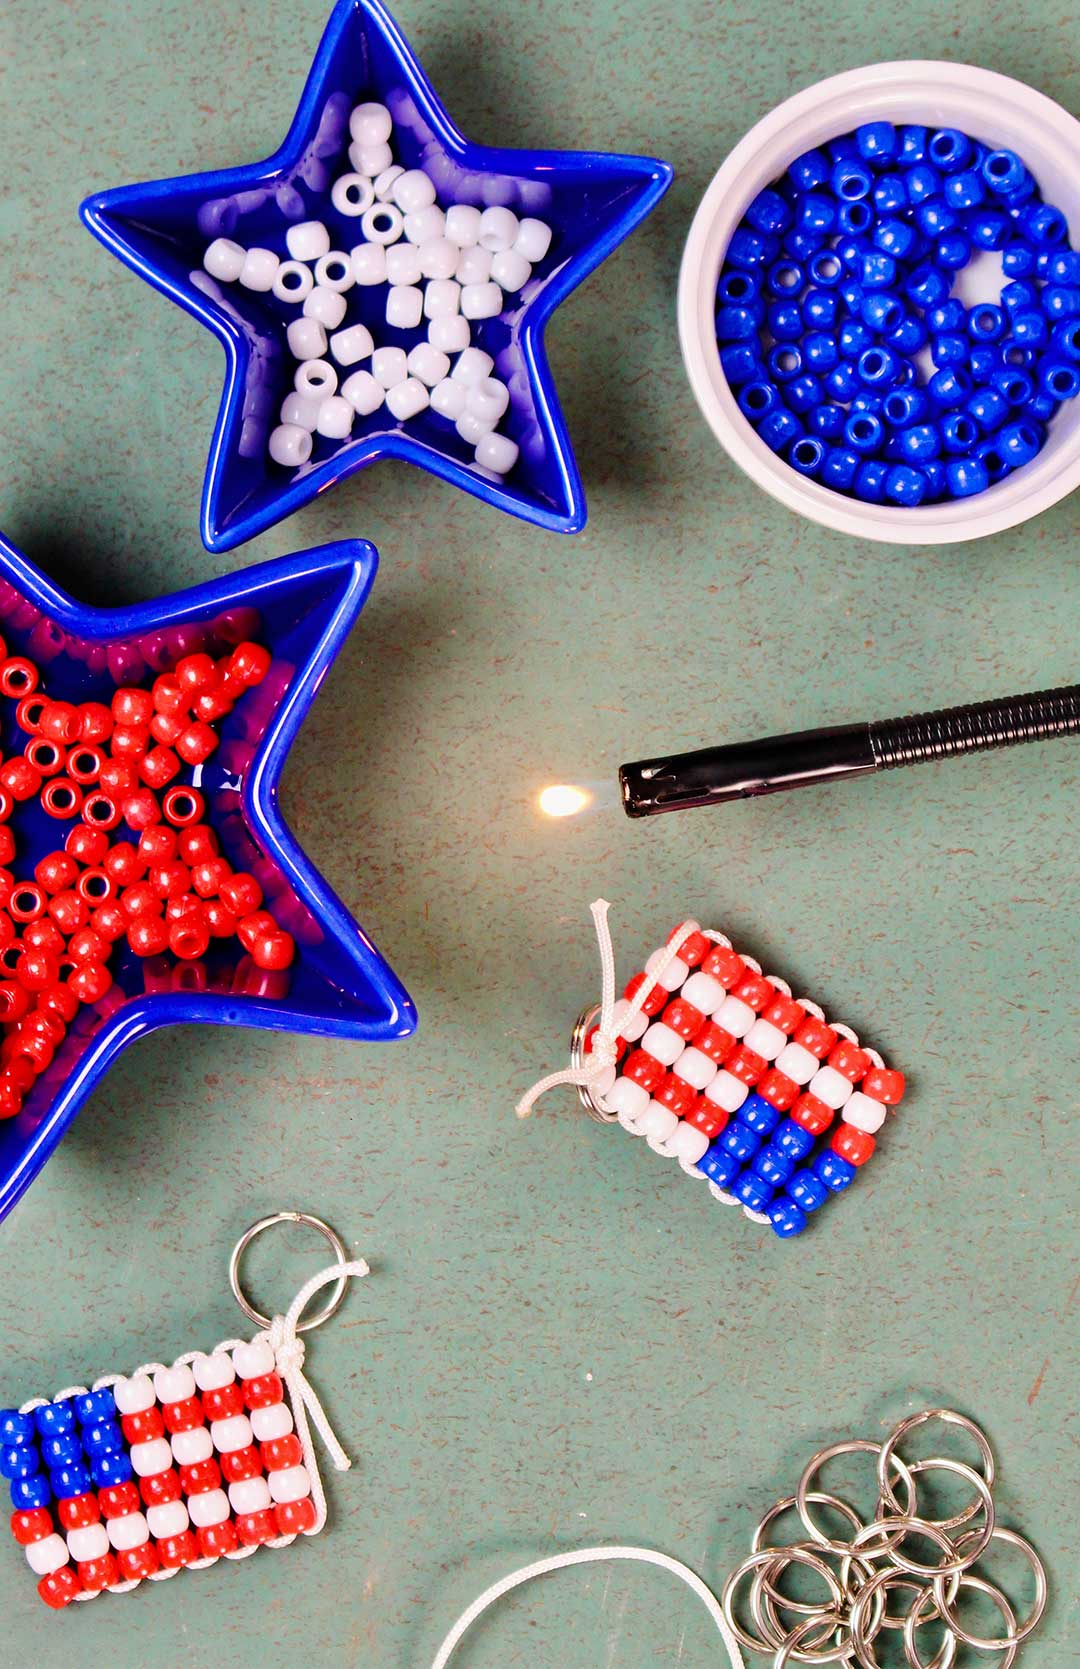 Three dishes of red, white and blue pony beads with a finished beaded flag keychain and key rings resting on a green counter. Finished keychain near lit lighter to seal string.